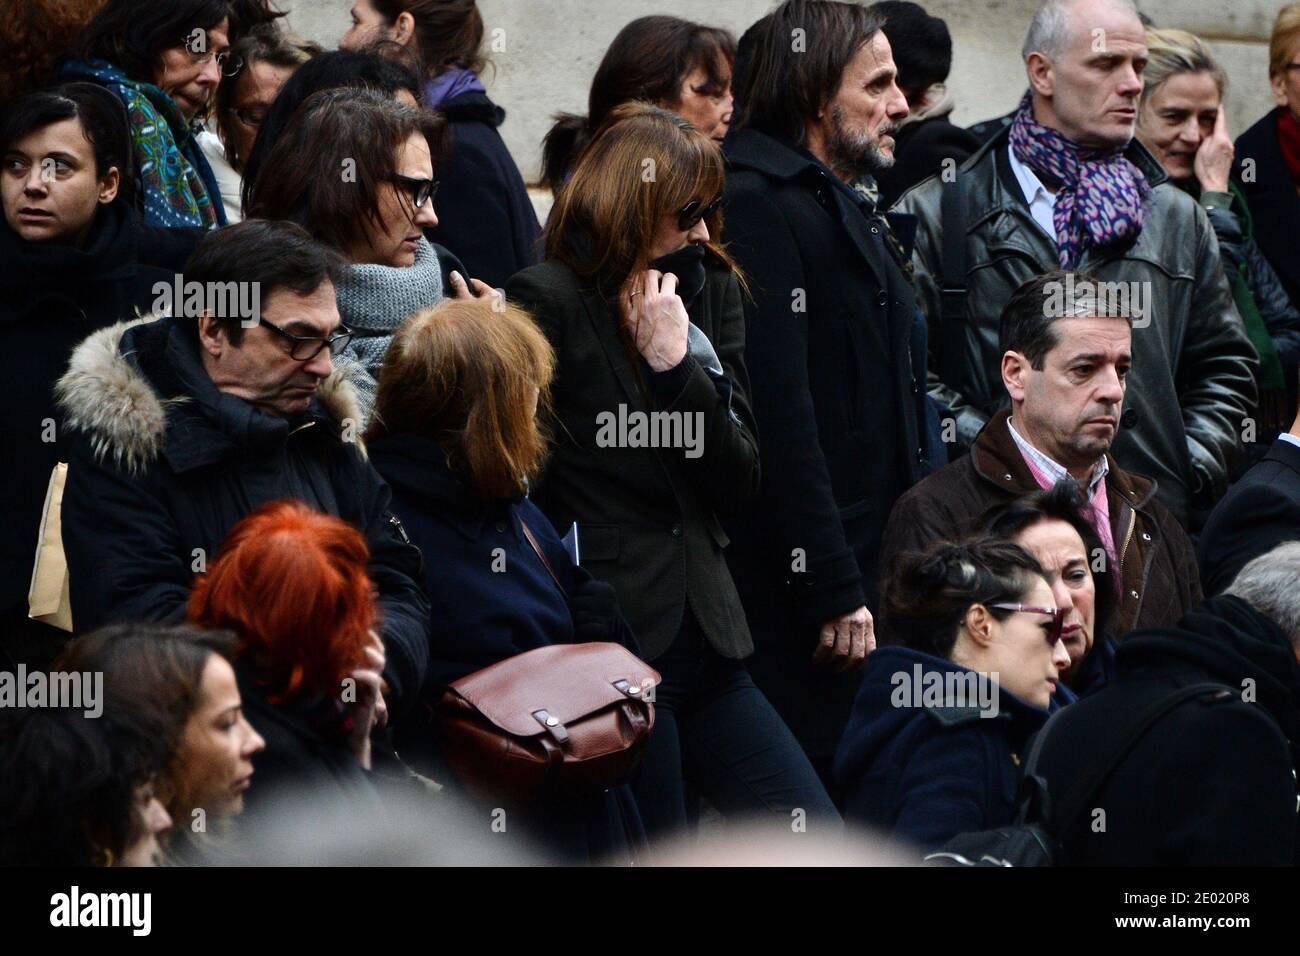 Please hide the children's faces prior to the publication Carla Bruni-Sarkozy attending a tribute mass for Kate Barry held at Saint Roch church in Paris, France on December 19, 2013. Photographer Kate Barry, the daughter of Jane Birkin and John Barry has been found dead on December 11 after falling from the window of her apartment in Paris. She was 46. Photo by ABACAPRESS.COM Stock Photo